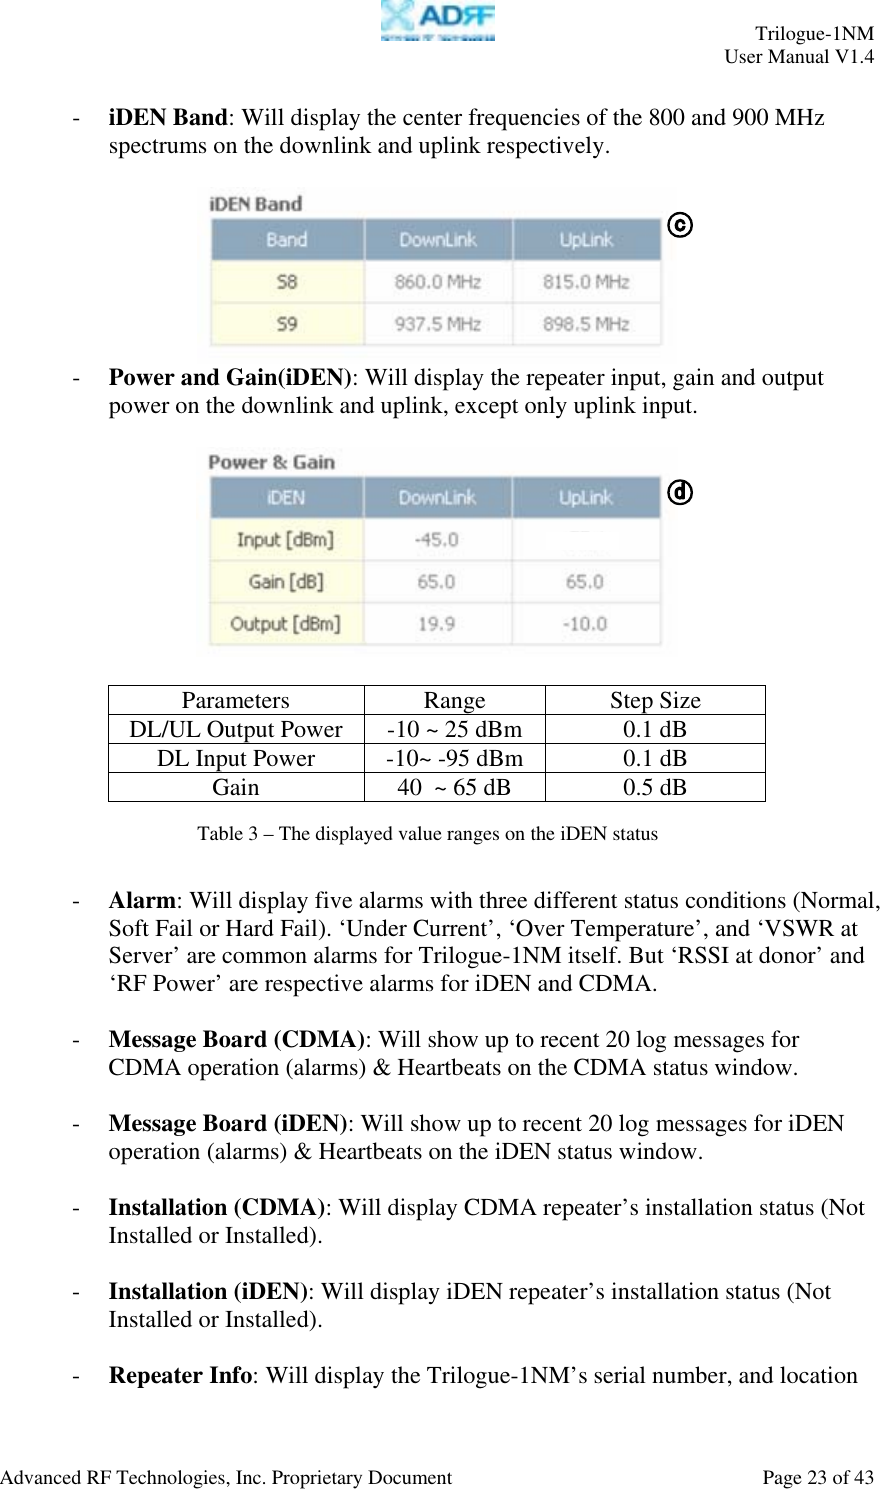     Trilogue-1NM User Manual V1.4  Advanced RF Technologies, Inc. Proprietary Document  Page 23 of 43  - iDEN Band: Will display the center frequencies of the 800 and 900 MHz spectrums on the downlink and uplink respectively.     - Power and Gain(iDEN): Will display the repeater input, gain and output power on the downlink and uplink, except only uplink input.    Parameters Range Step Size DL/UL Output Power  -10 ~ 25 dBm  0.1 dB DL Input Power  -10~ -95 dBm  0.1 dB Gain  40  ~ 65 dB  0.5 dB    - Alarm: Will display five alarms with three different status conditions (Normal, Soft Fail or Hard Fail). ‘Under Current’, ‘Over Temperature’, and ‘VSWR at Server’ are common alarms for Trilogue-1NM itself. But ‘RSSI at donor’ and ‘RF Power’ are respective alarms for iDEN and CDMA.  - Message Board (CDMA): Will show up to recent 20 log messages for CDMA operation (alarms) &amp; Heartbeats on the CDMA status window.  - Message Board (iDEN): Will show up to recent 20 log messages for iDEN operation (alarms) &amp; Heartbeats on the iDEN status window.  - Installation (CDMA): Will display CDMA repeater’s installation status (Not Installed or Installed).  - Installation (iDEN): Will display iDEN repeater’s installation status (Not Installed or Installed).  - Repeater Info: Will display the Trilogue-1NM’s serial number, and location Table 3 – The displayed value ranges on the iDEN status 